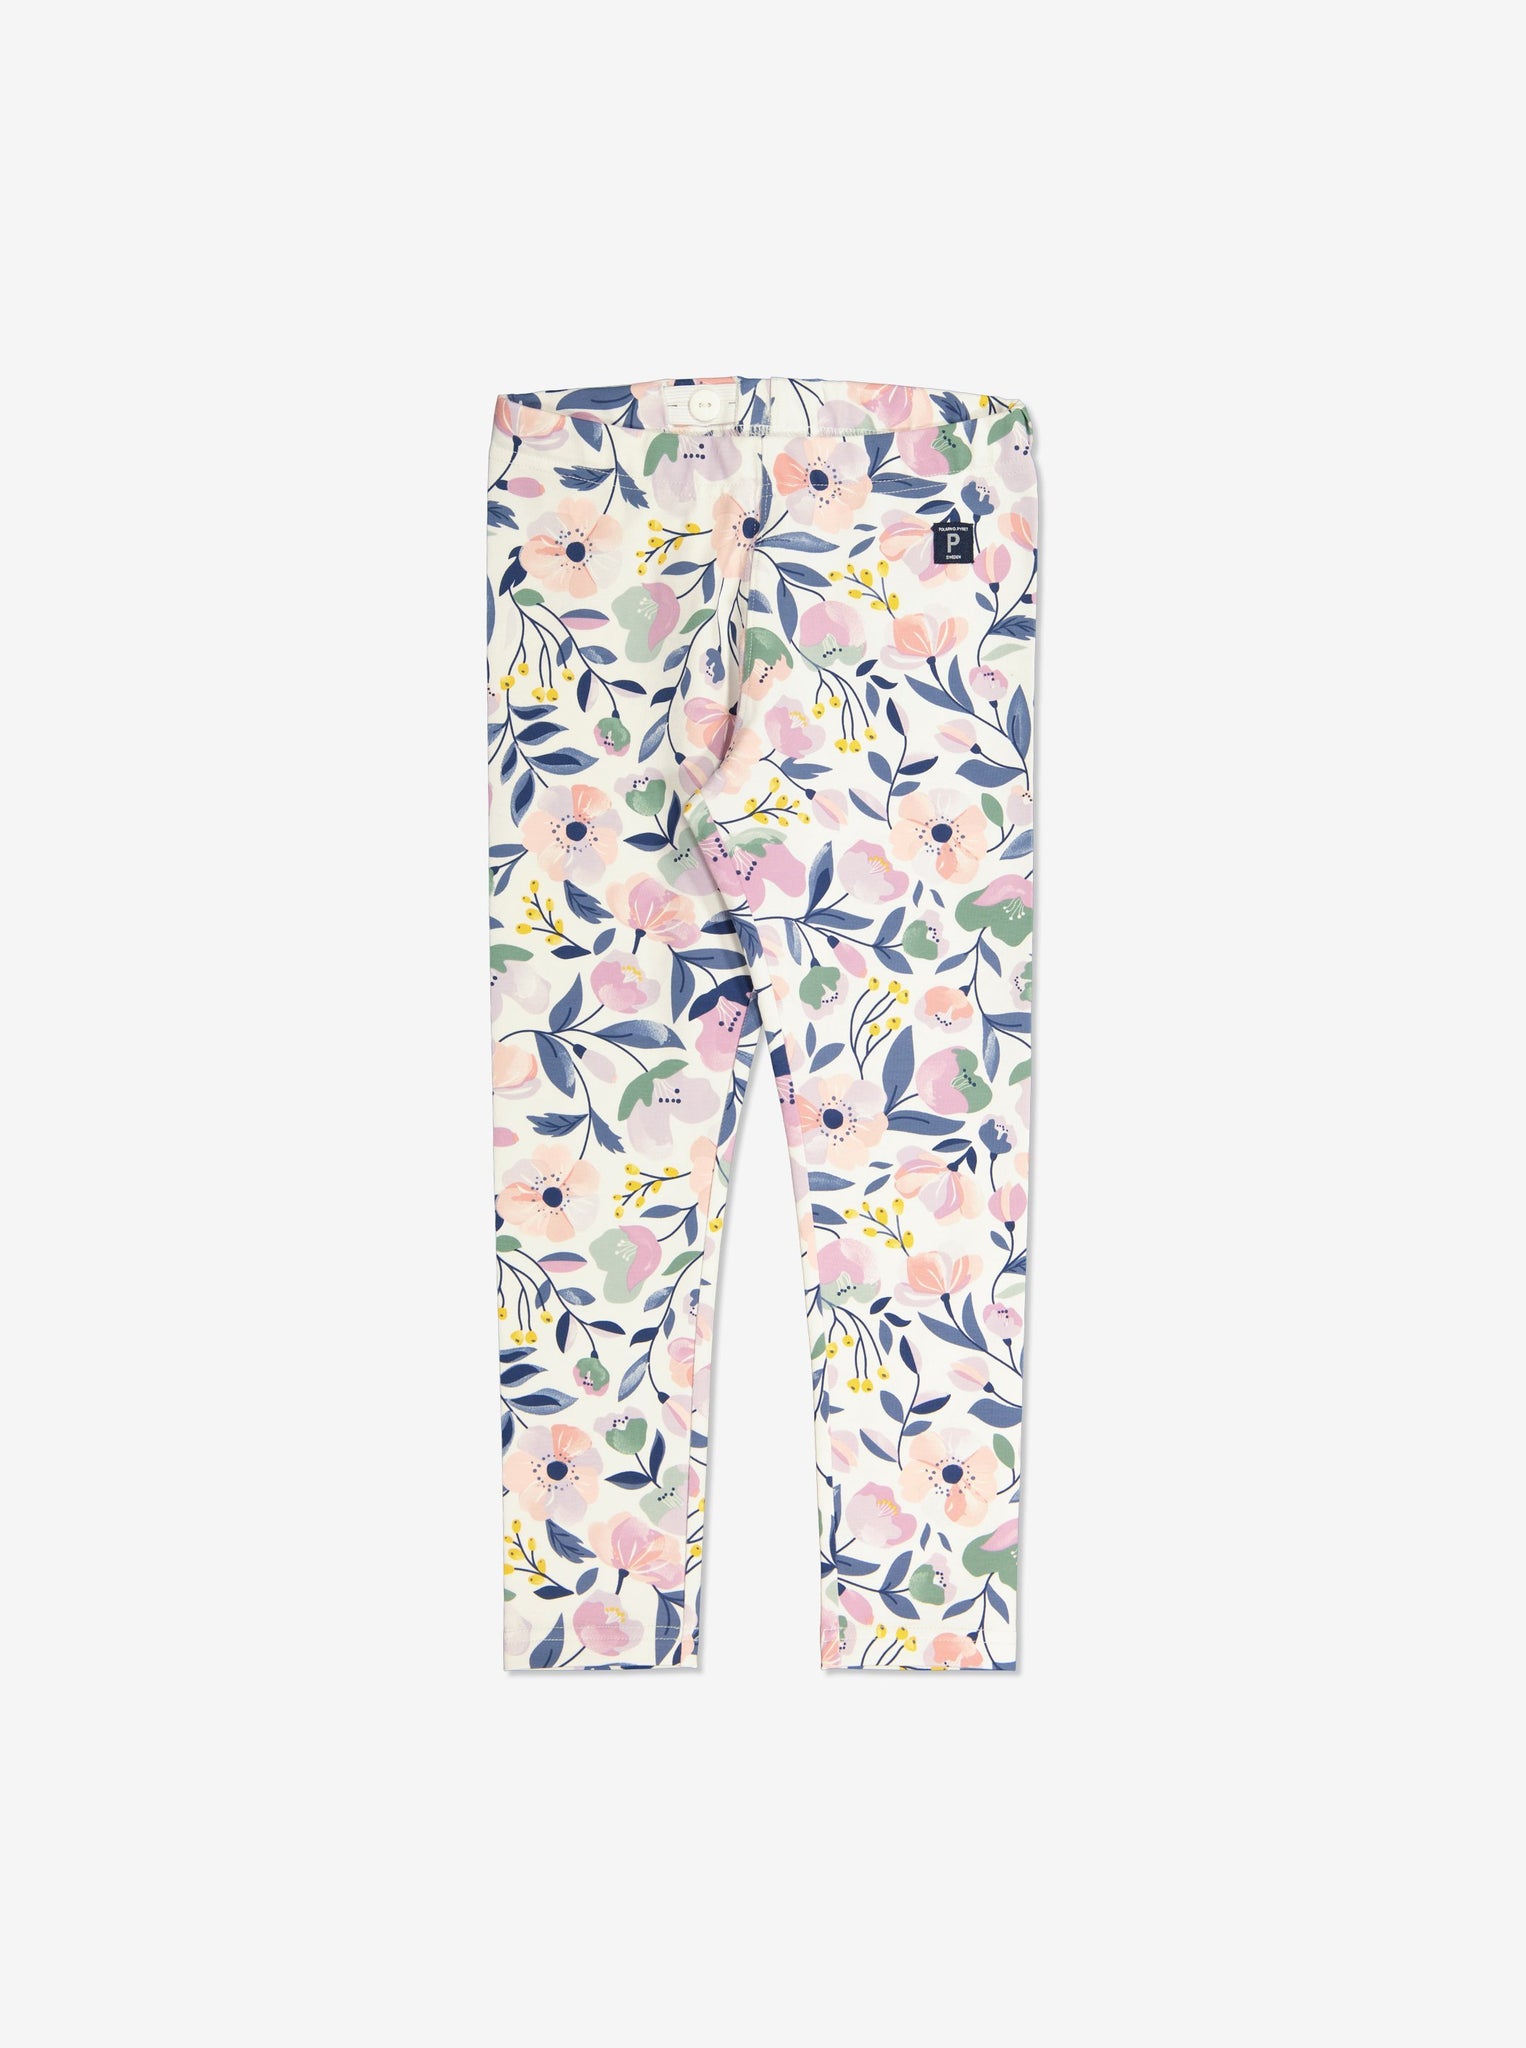  Organic White Floral Kids Leggings from Polarn O. Pyret Kidswear. Made from sustainably sourced materials.